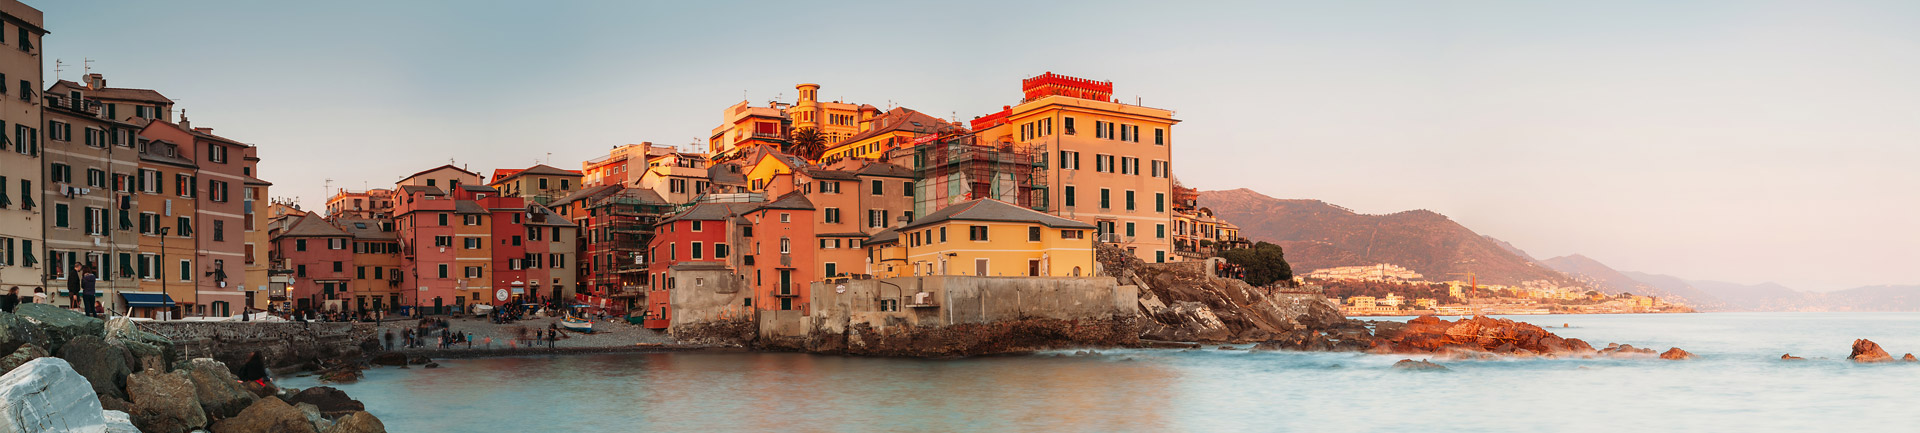 Boccadasse, the place where lovers and poets can still dream